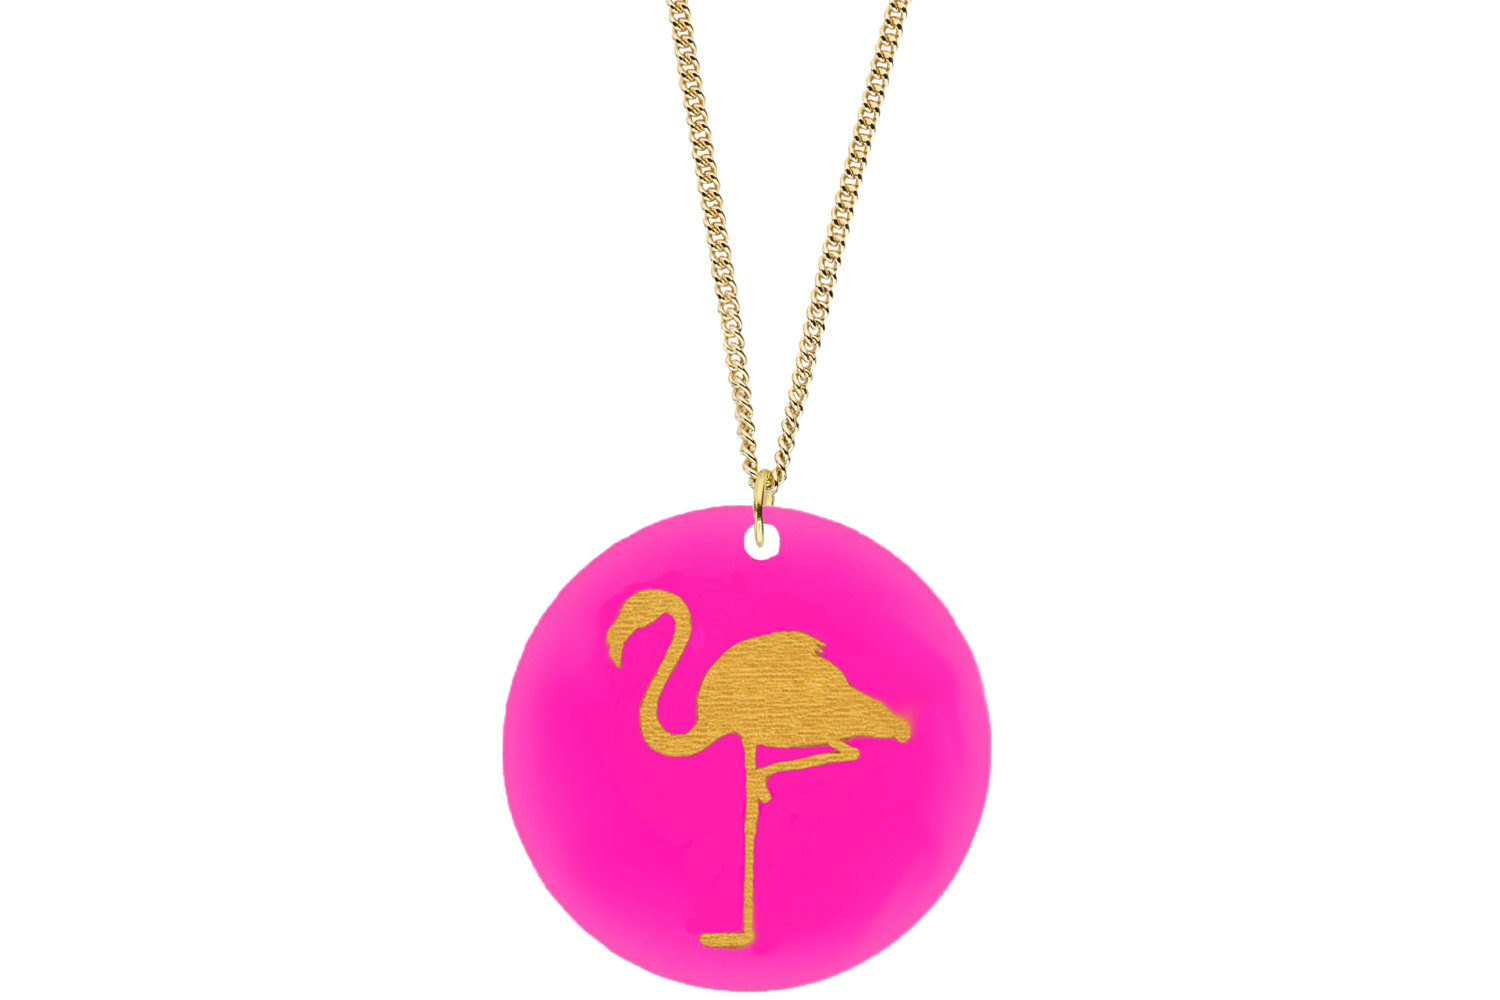 Flamingo Pendant Subtle Style Refined with Paint on Chain Necklace